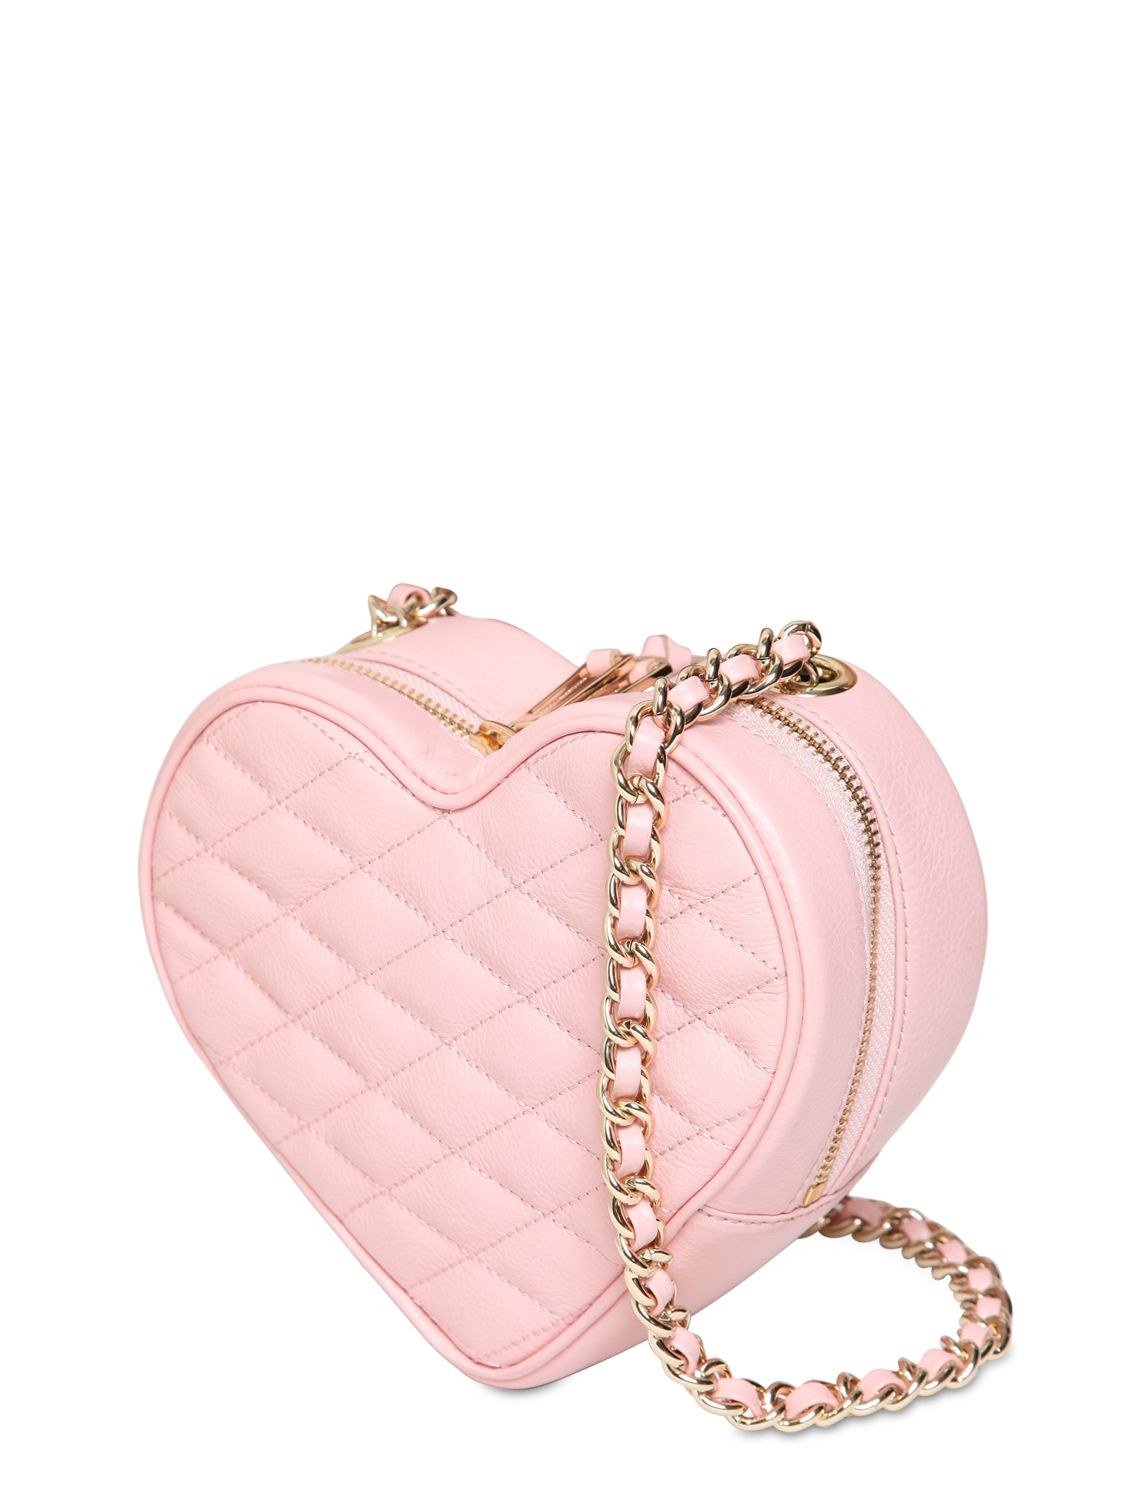 Lyst - Rebecca Minkoff Heart Quilted Leather Shoulder Bag in Pink